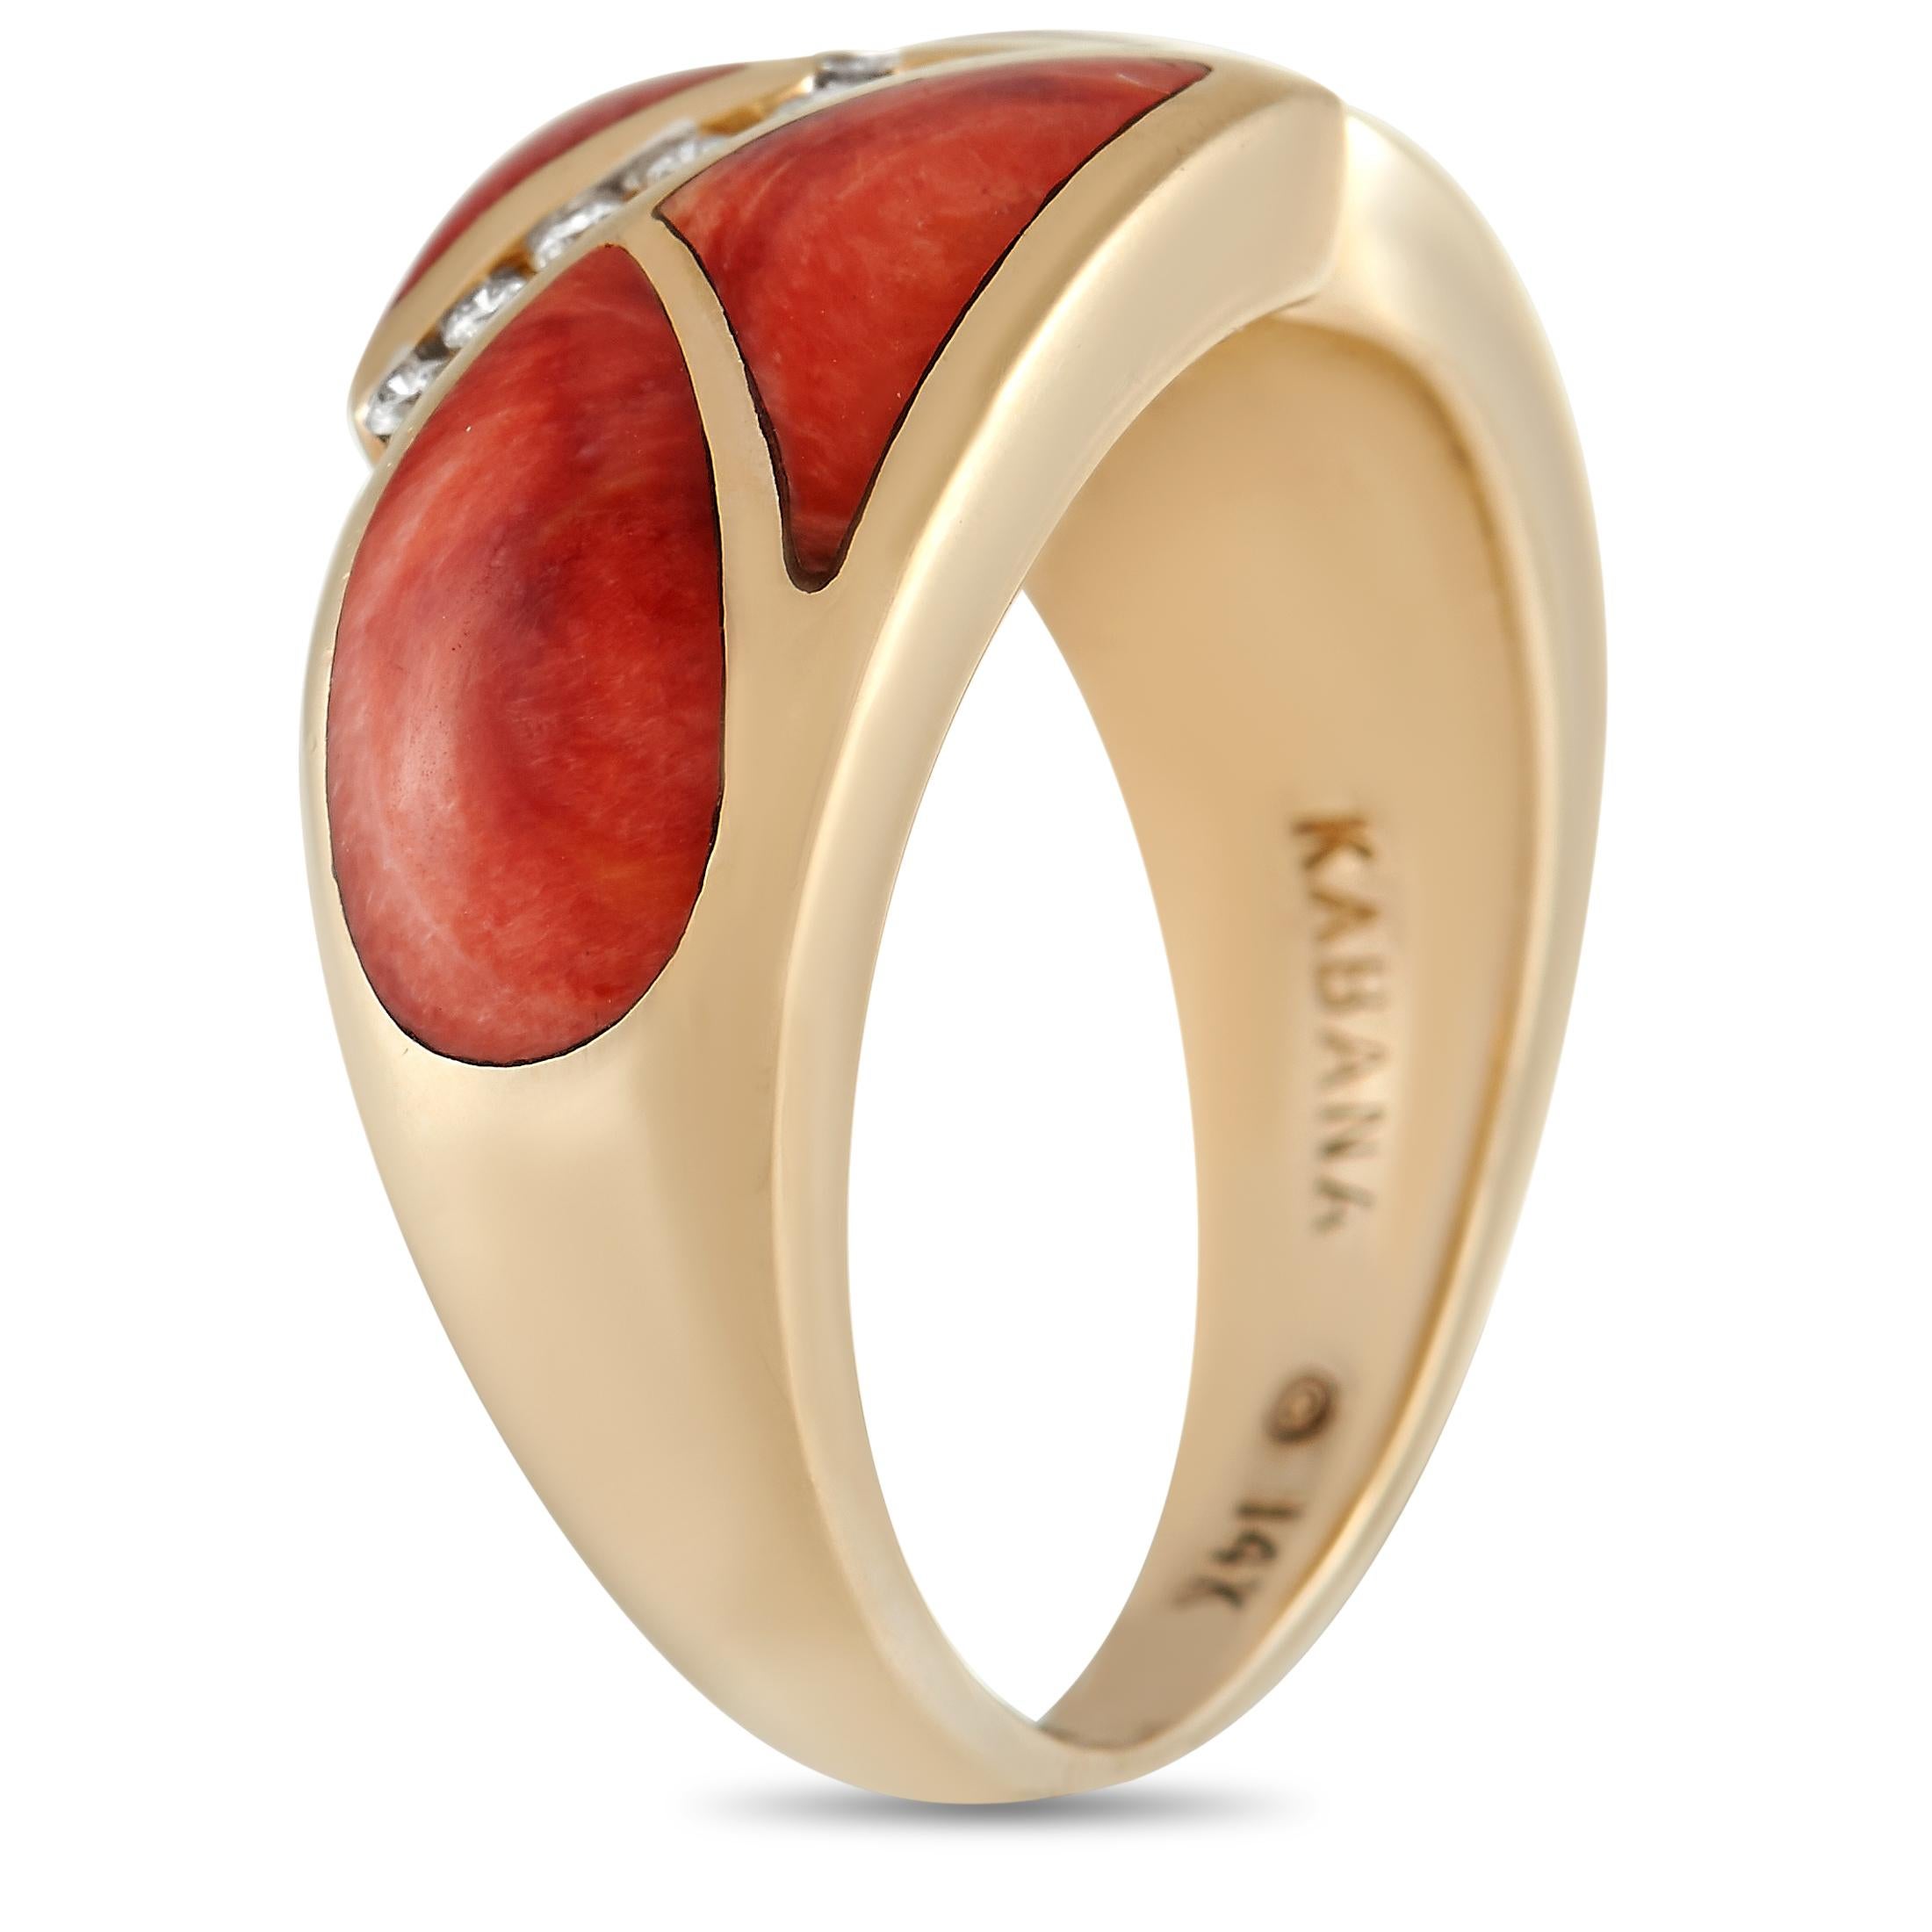 You’ve never seen anything quite like this sleek, sophisticated ring from Kabana. At the top of a 14K Yellow Gold setting with a 4mm wide band and a 3mm top height, you’ll find opulent orange-hued Spiny stones in a dramatic geometric pattern. A